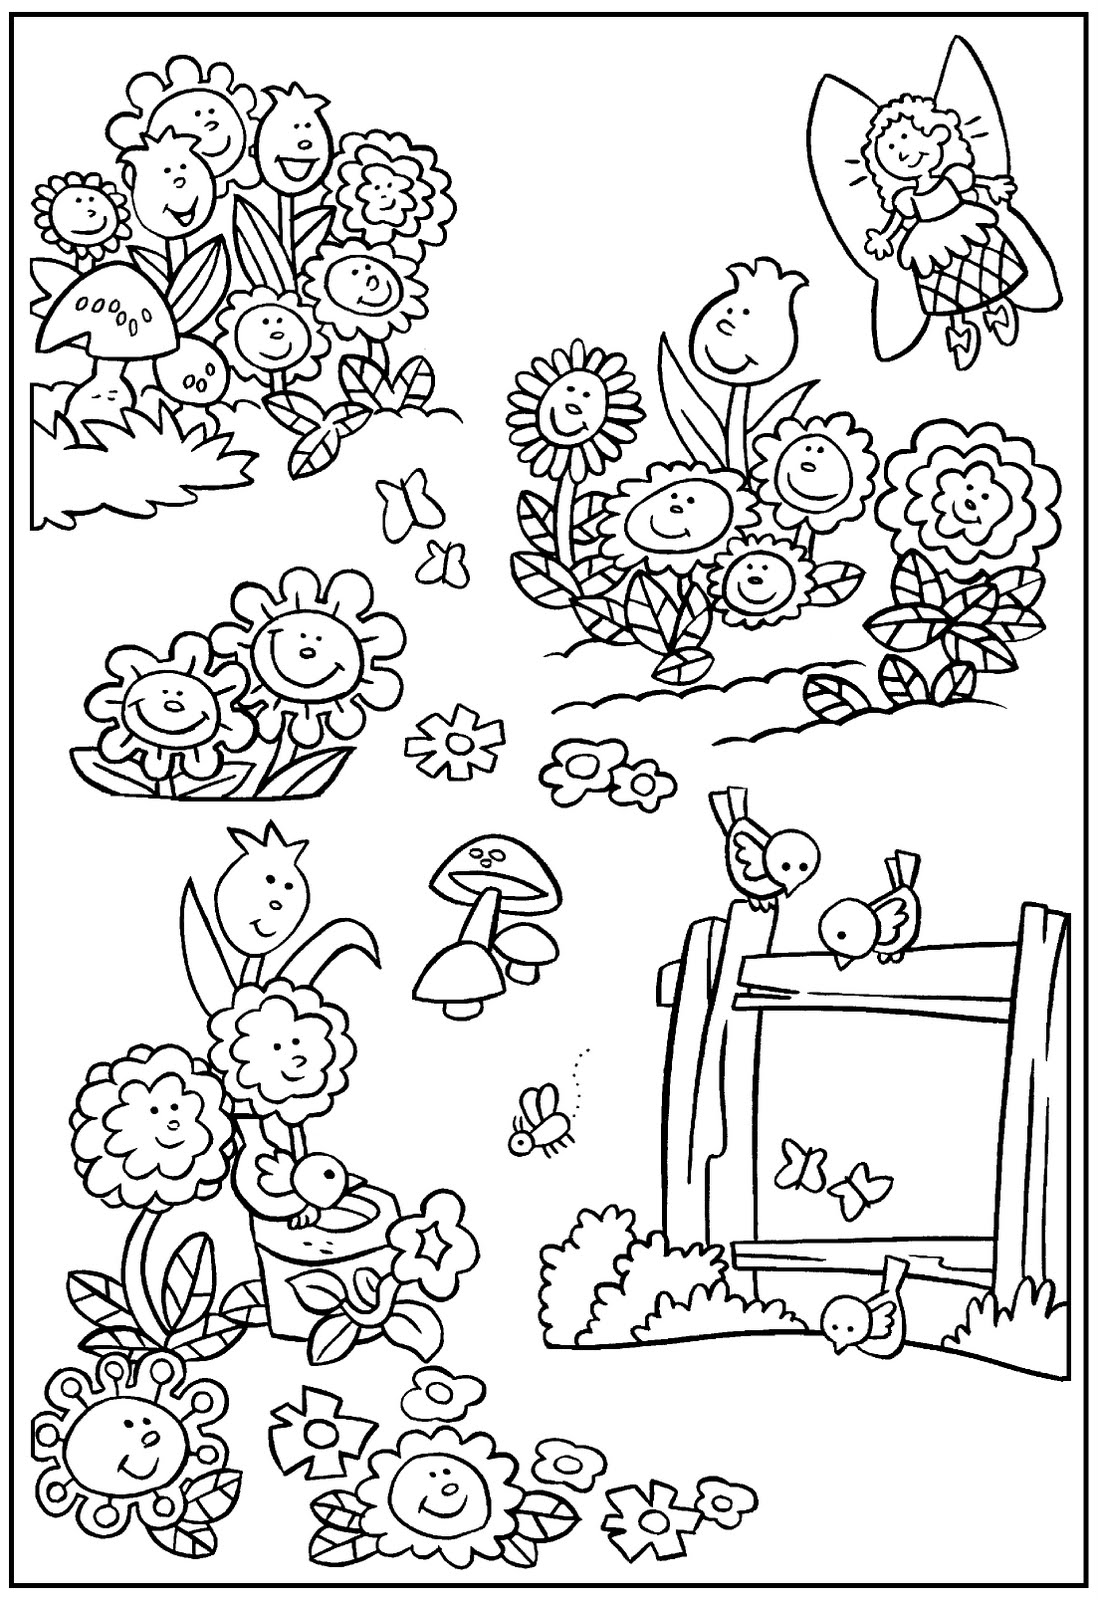 Gardening Coloring Pages   Best Coloring Pages For Kids